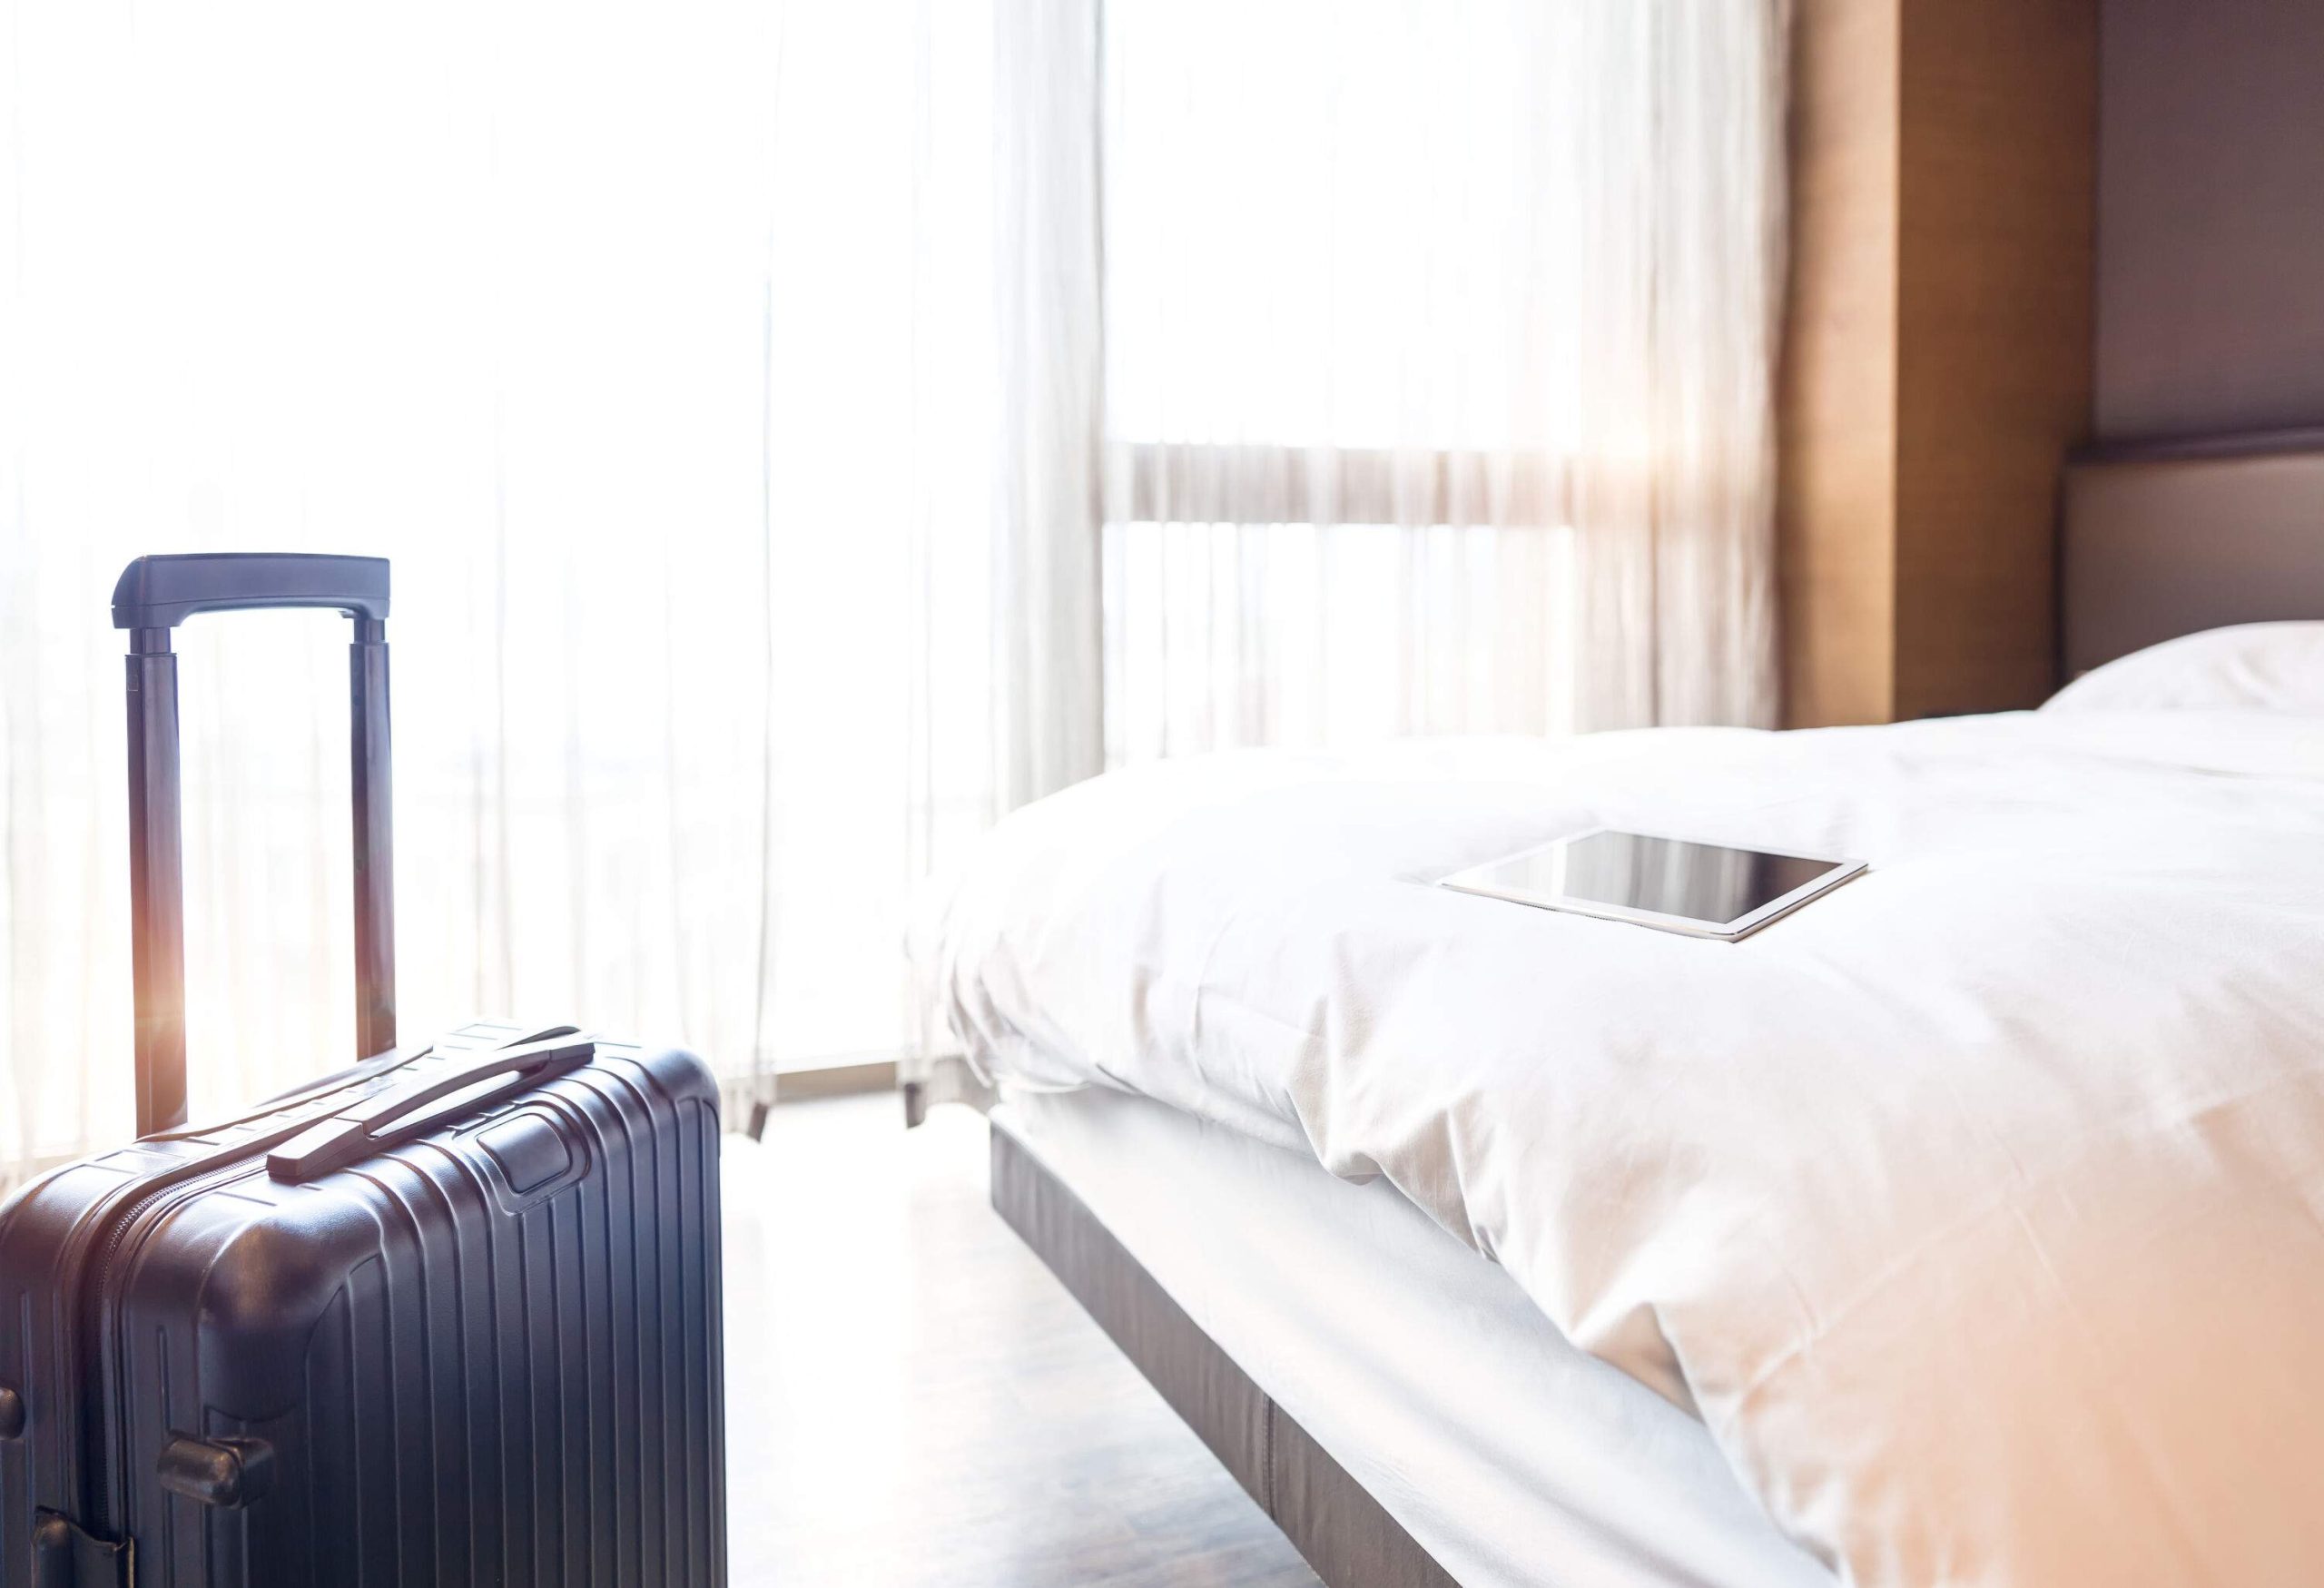 A hotel room with a tablet on a bed beside a black luggage.